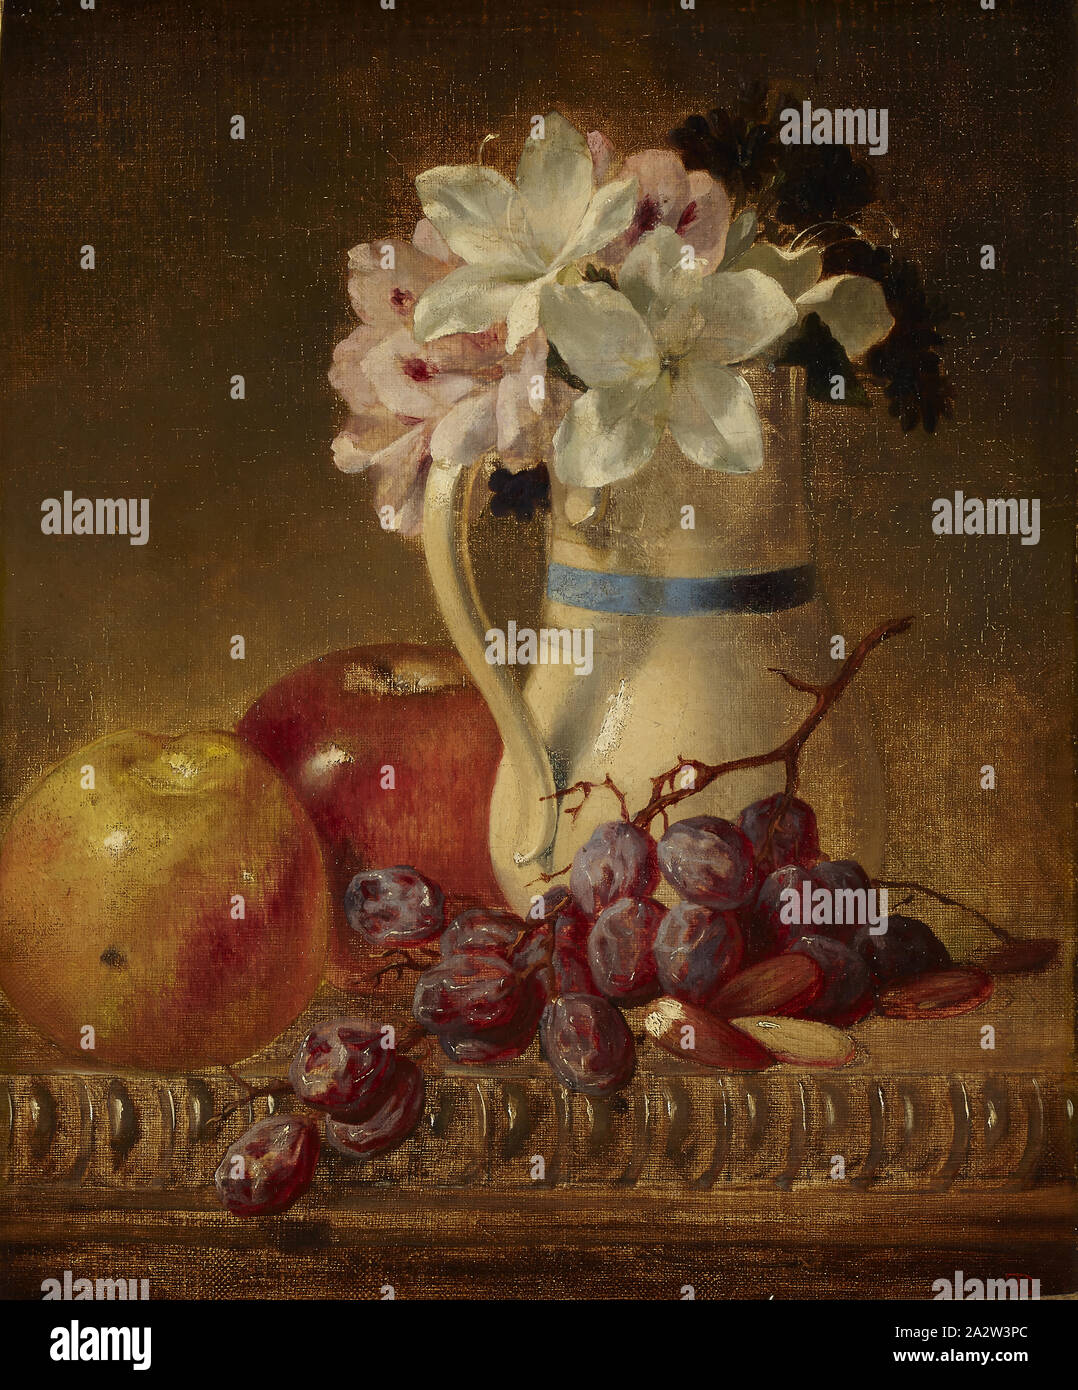 Still Life, Formerly attributed to Robert Spear Dunning (American, 1829-1905), 1862, oil on canvas, 12-1/8 x 10 in. (canvas) 15-3/8 x 13-3/8 x 1-3/4 in. (framed), Signed with monogram and dated in red paint, lower right: RED 1862, American Painting and Sculpture to 1945 Stock Photo